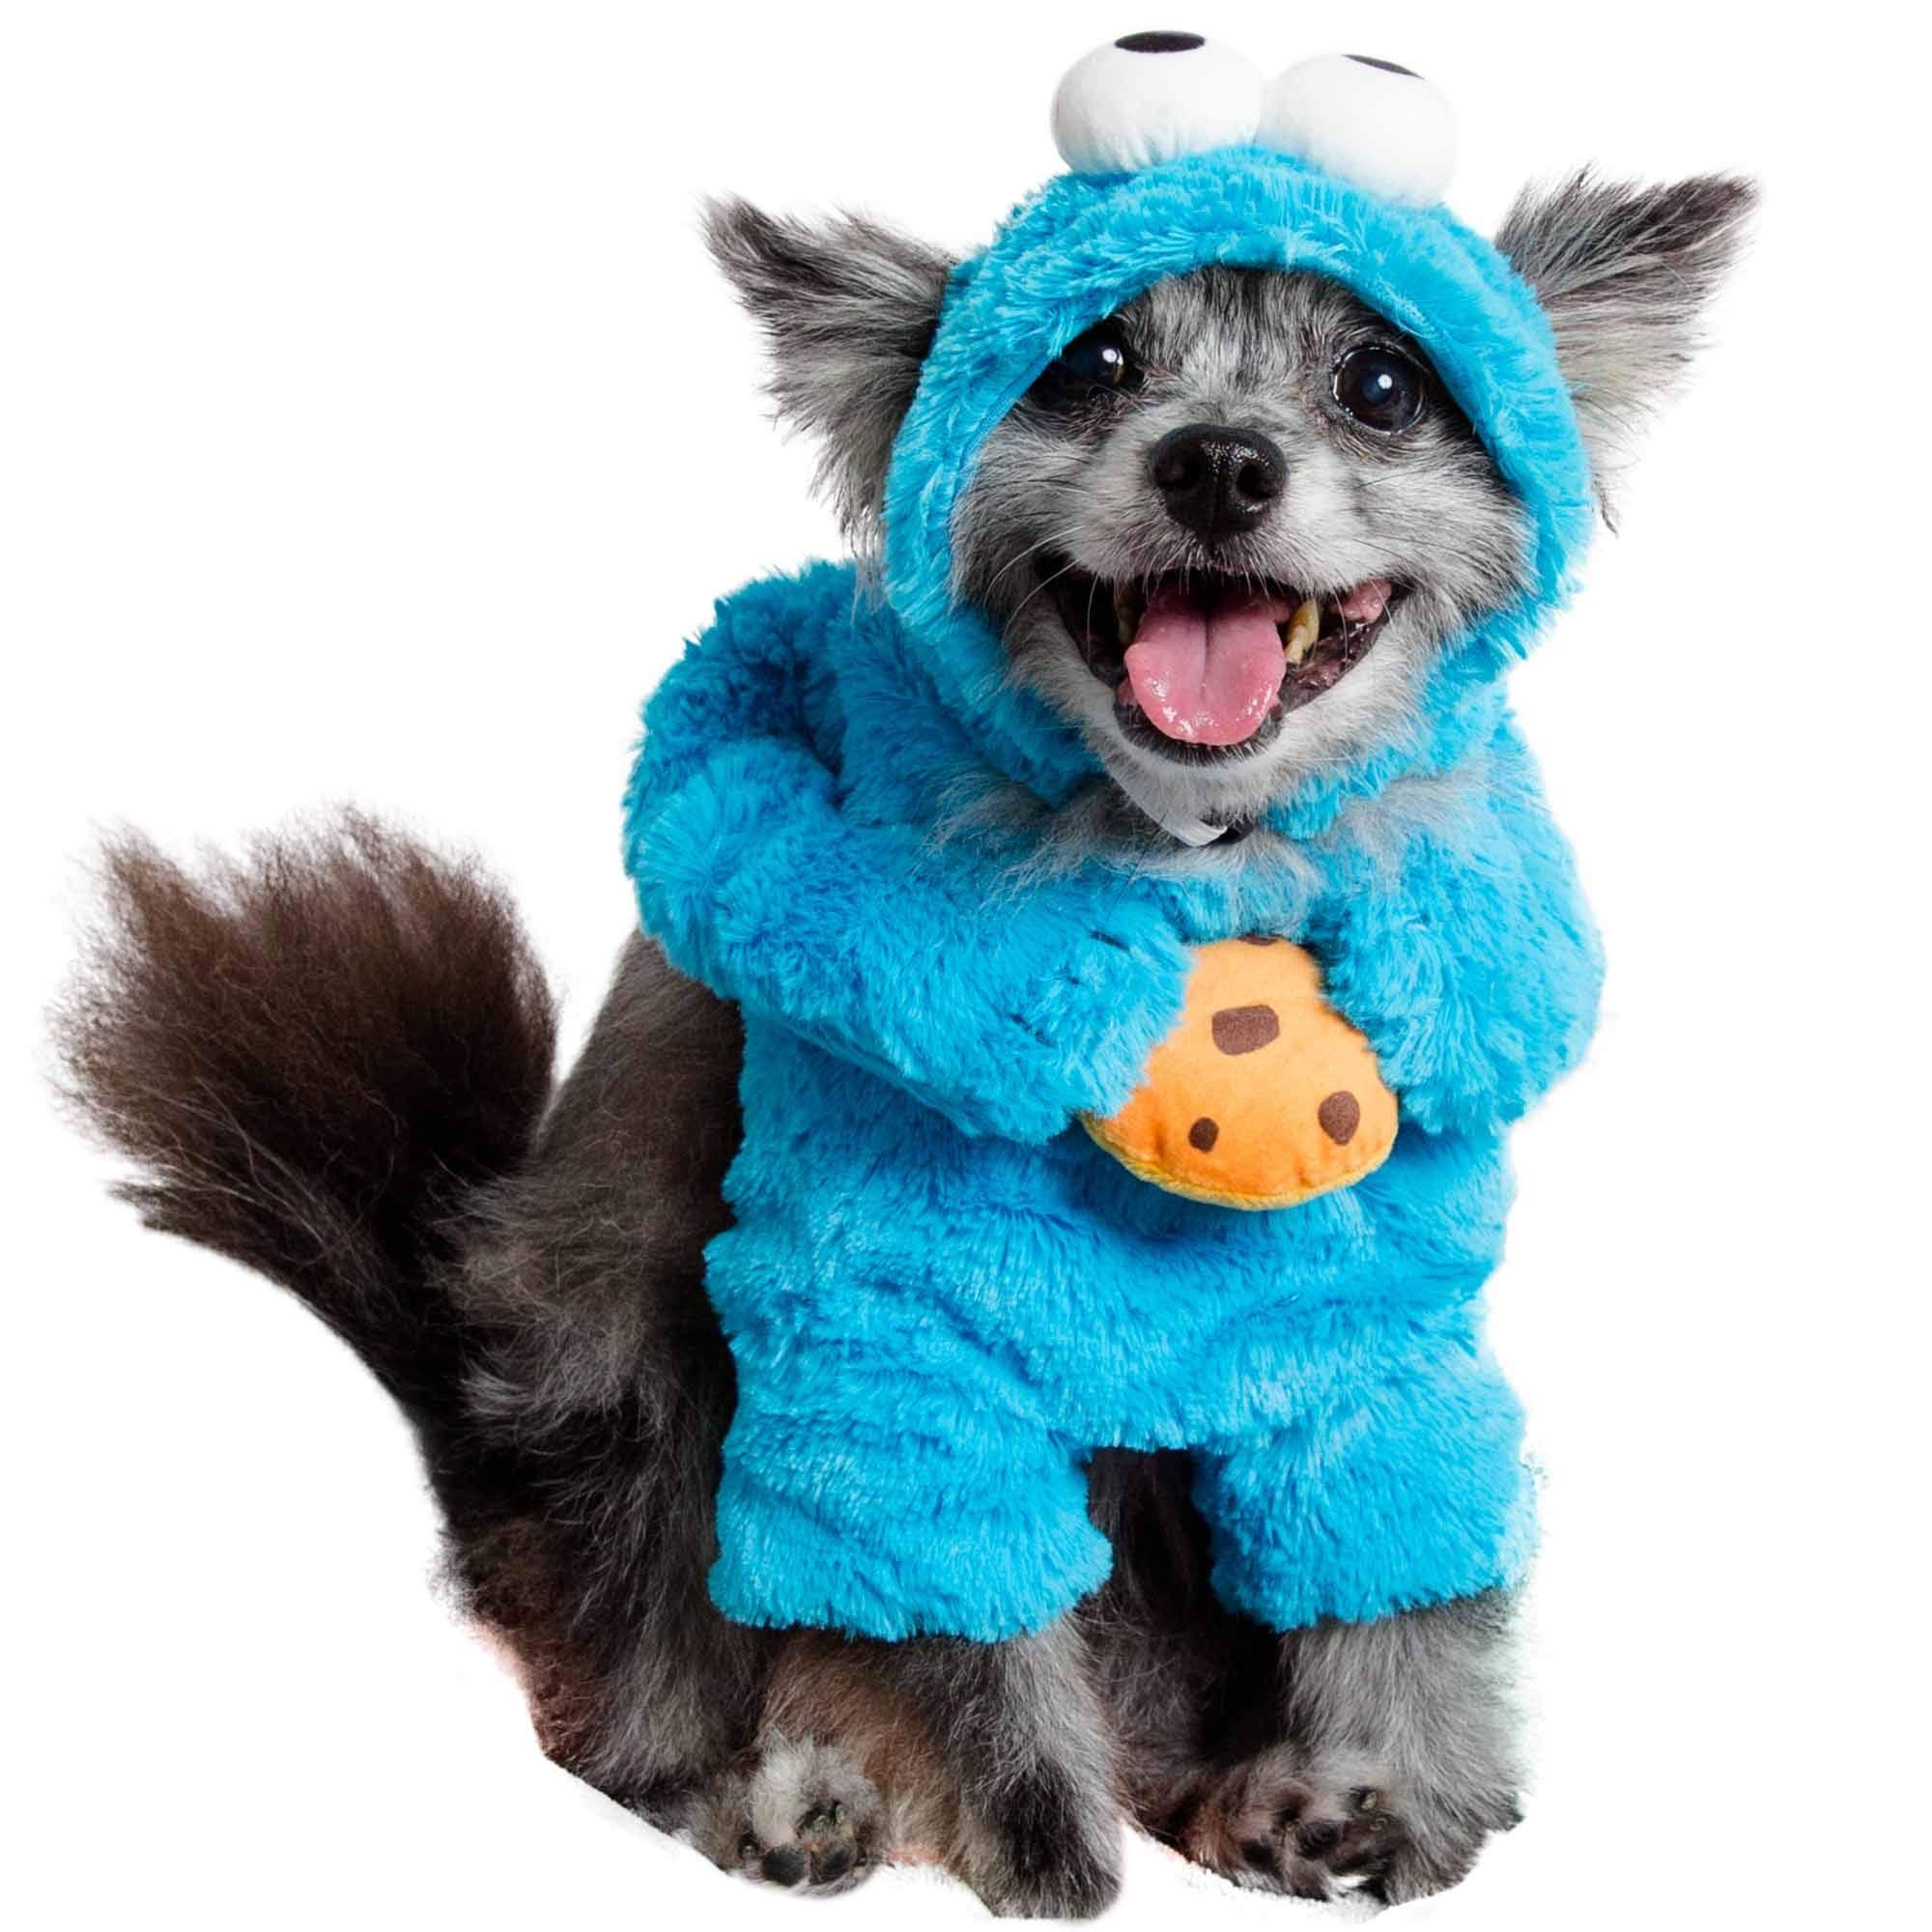 dog costumes for kids